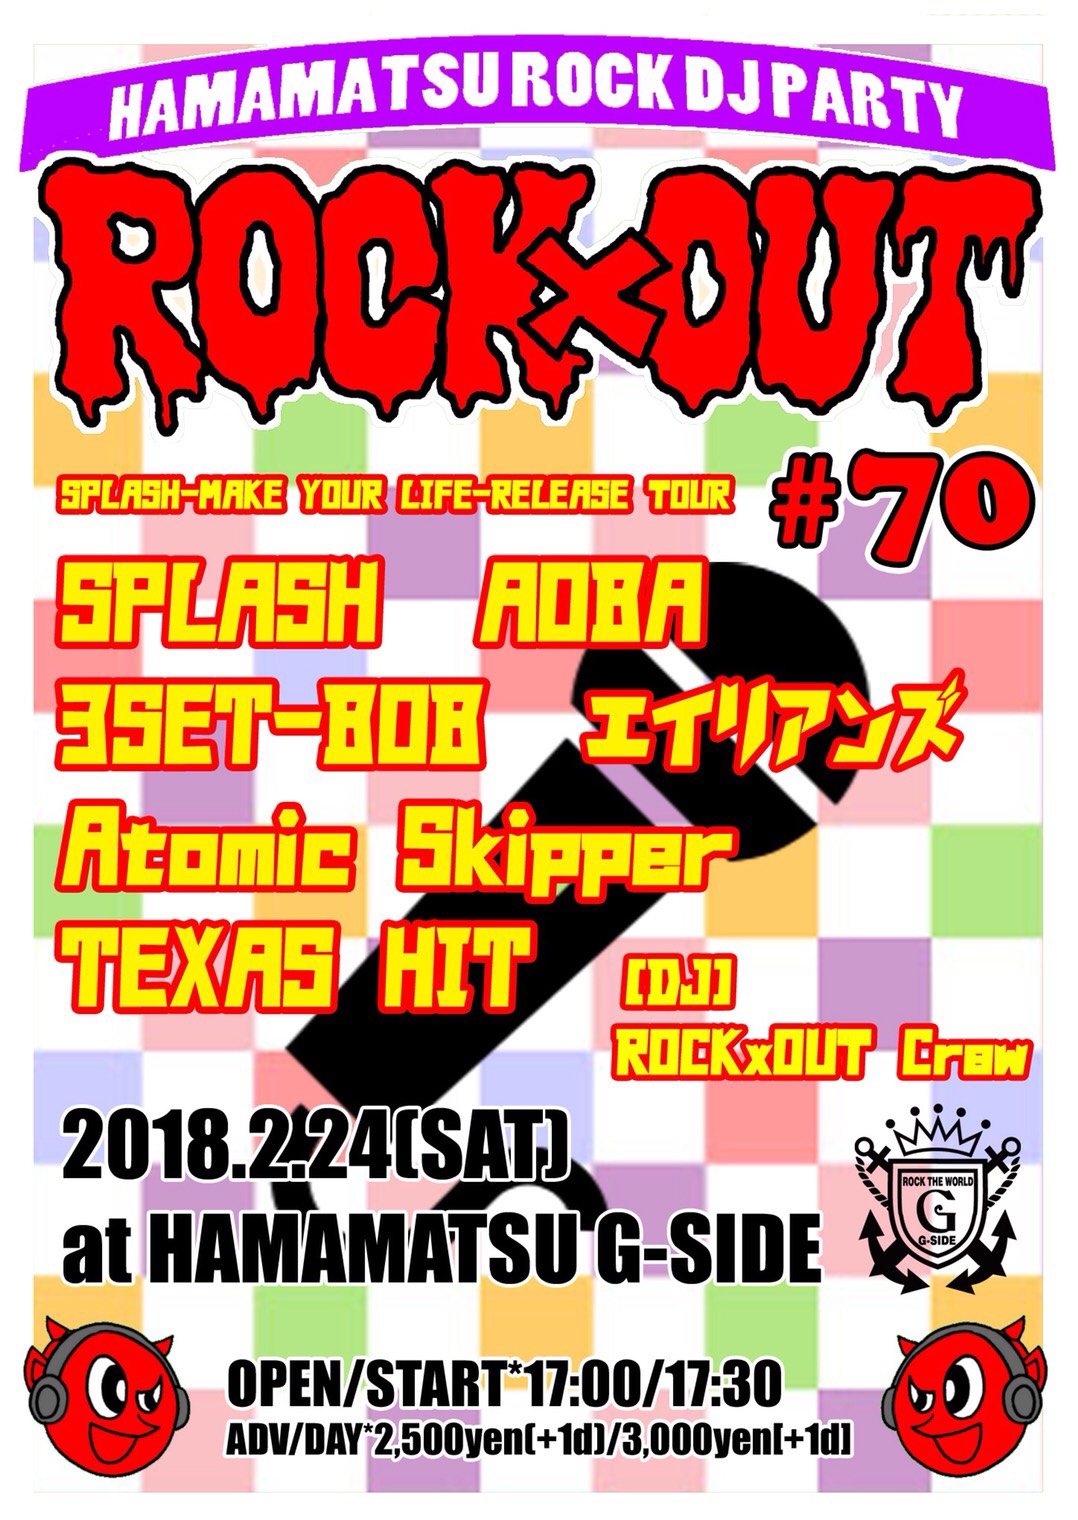 ROCK×OUT SPLASH-MAKE YOUR LIFE-RELEASE TOUR